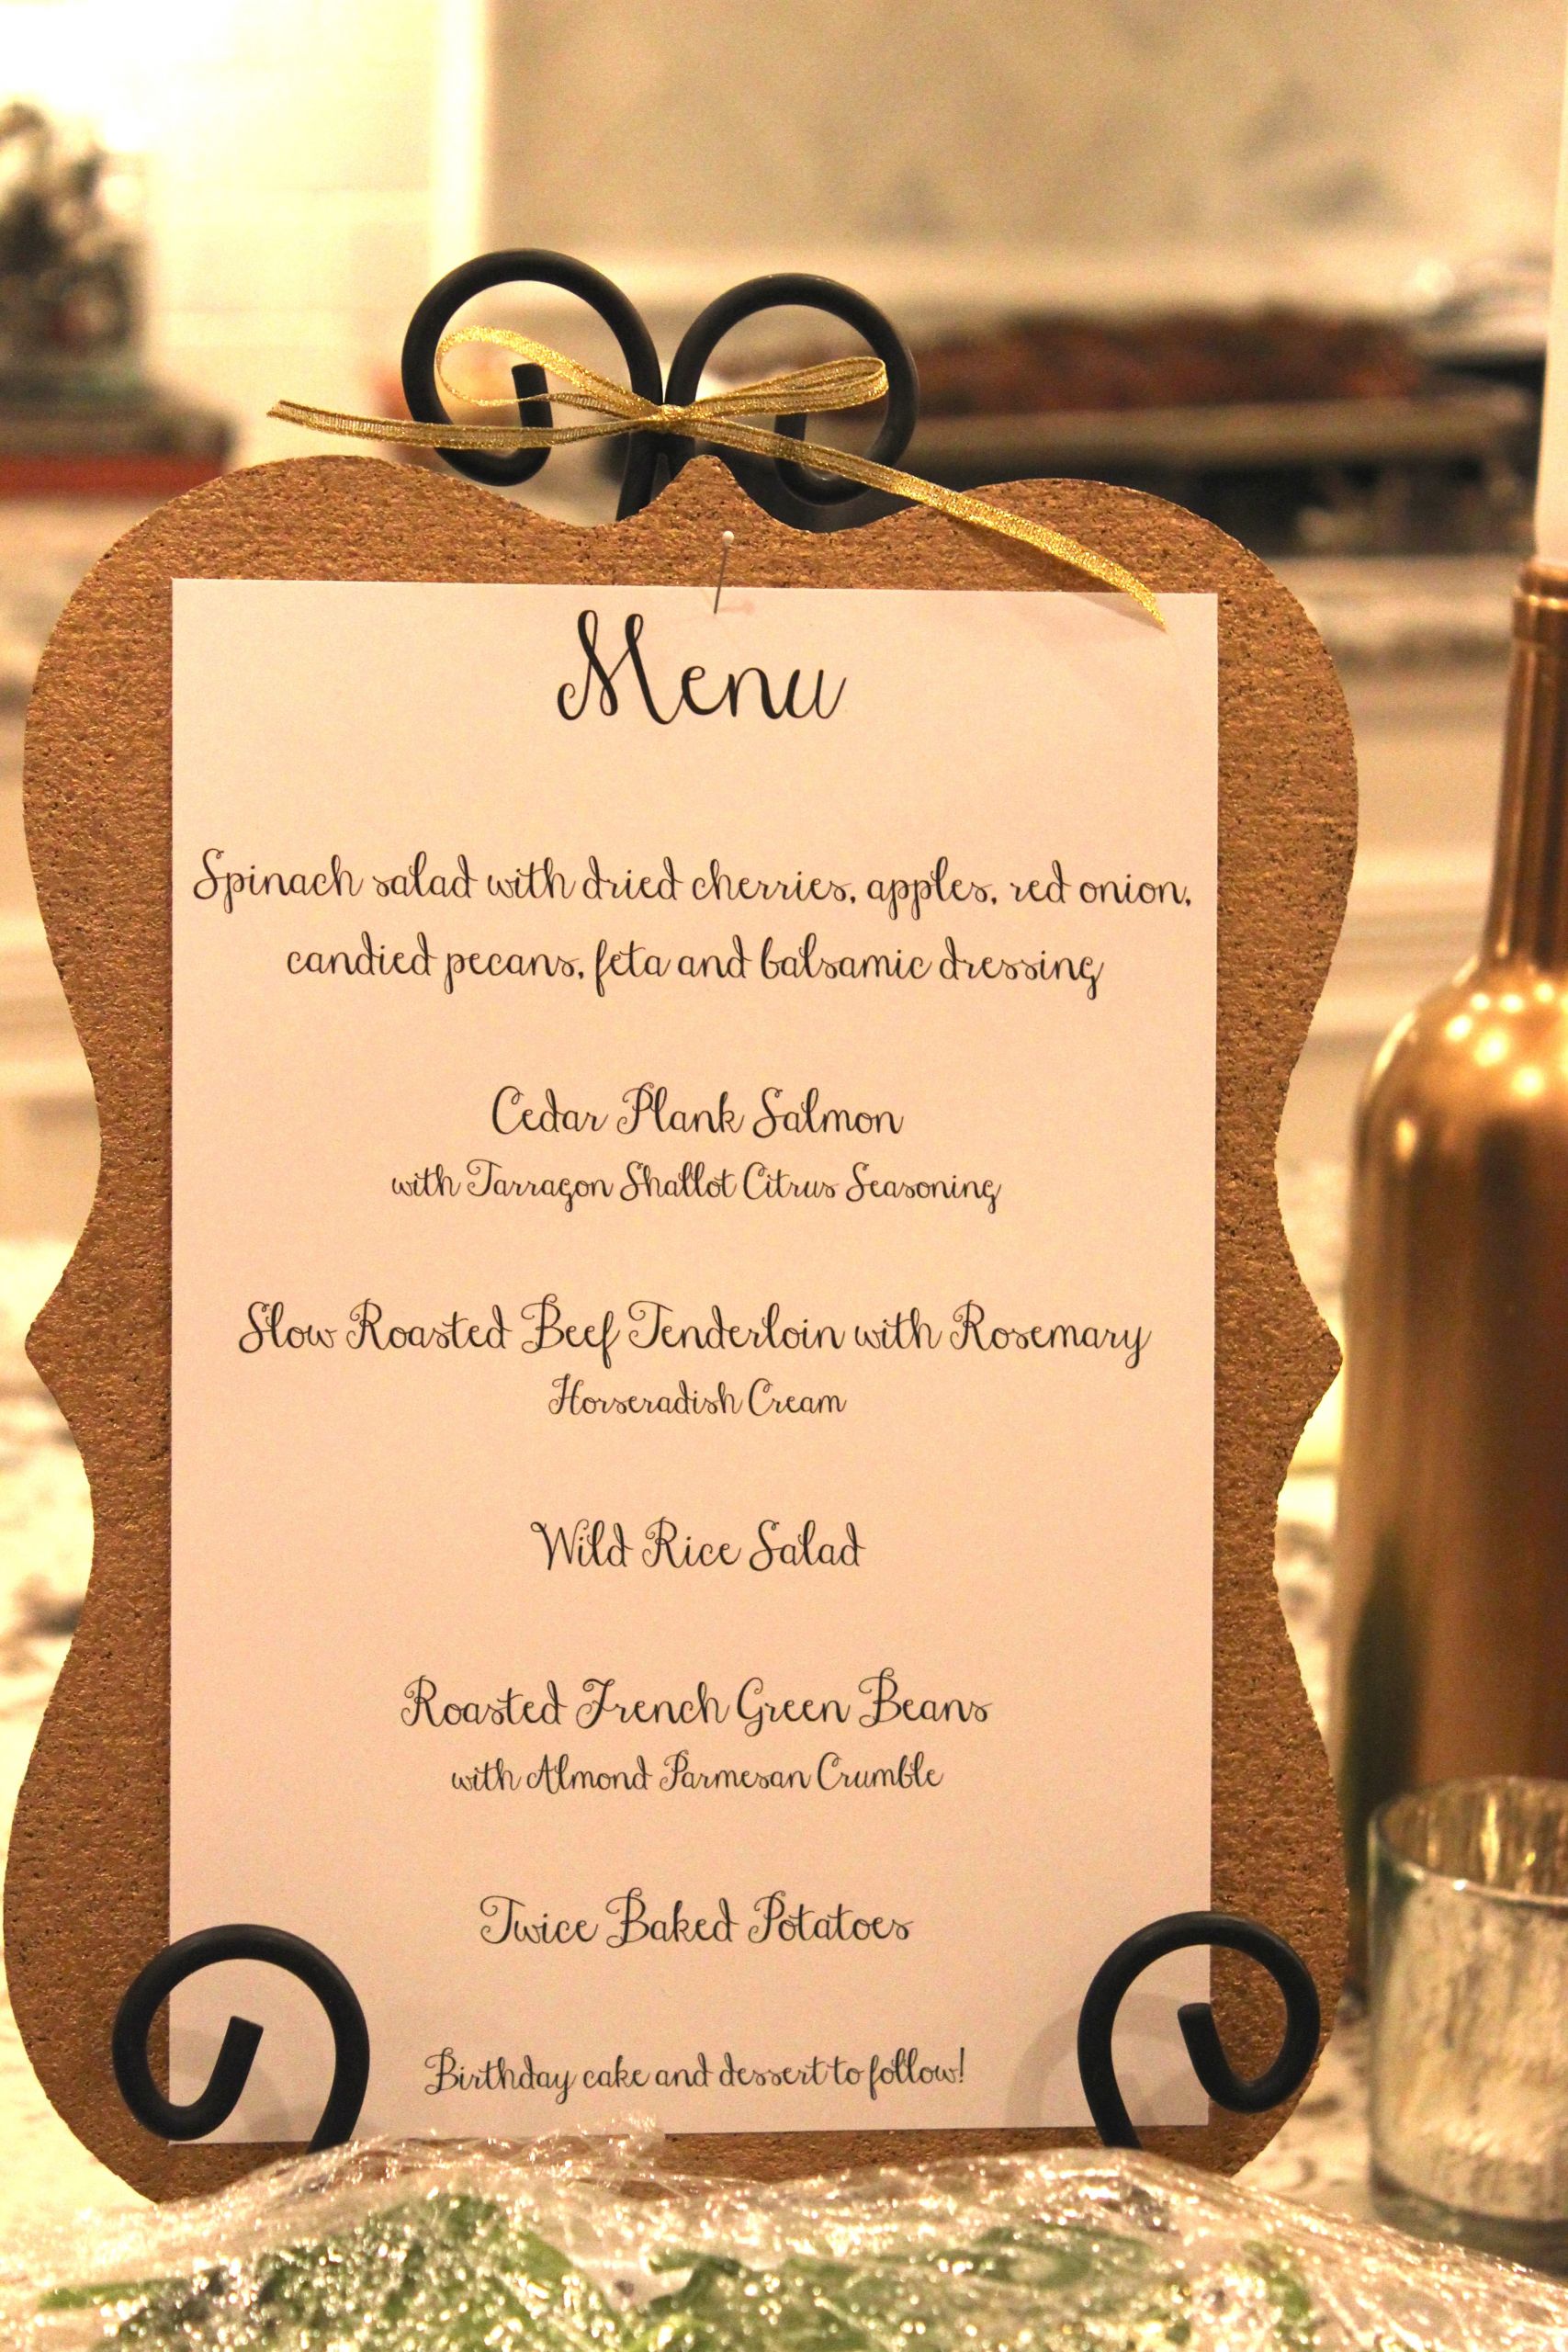 Menu Ideas For A Birthday Dinner Party
 Gold Black and White My 30th Birthday Dinner Party